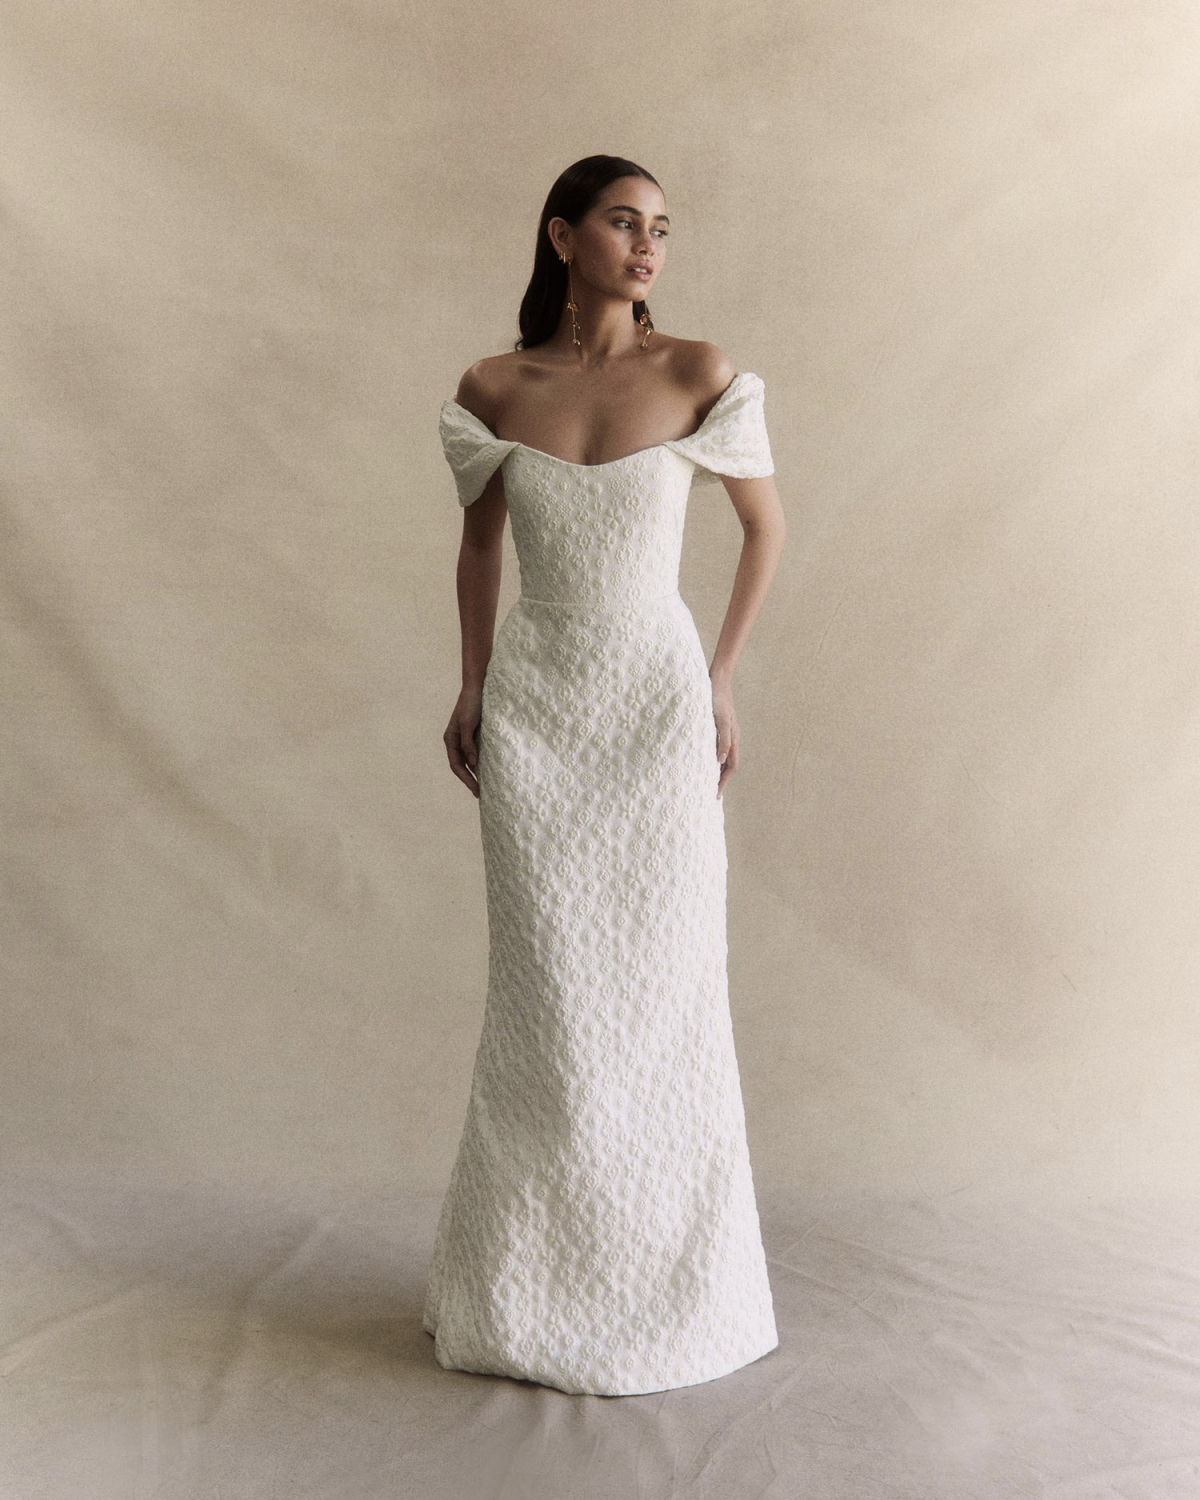 Wedding Dresses for Women with Broad Shoulders - Wedding Style Magazine